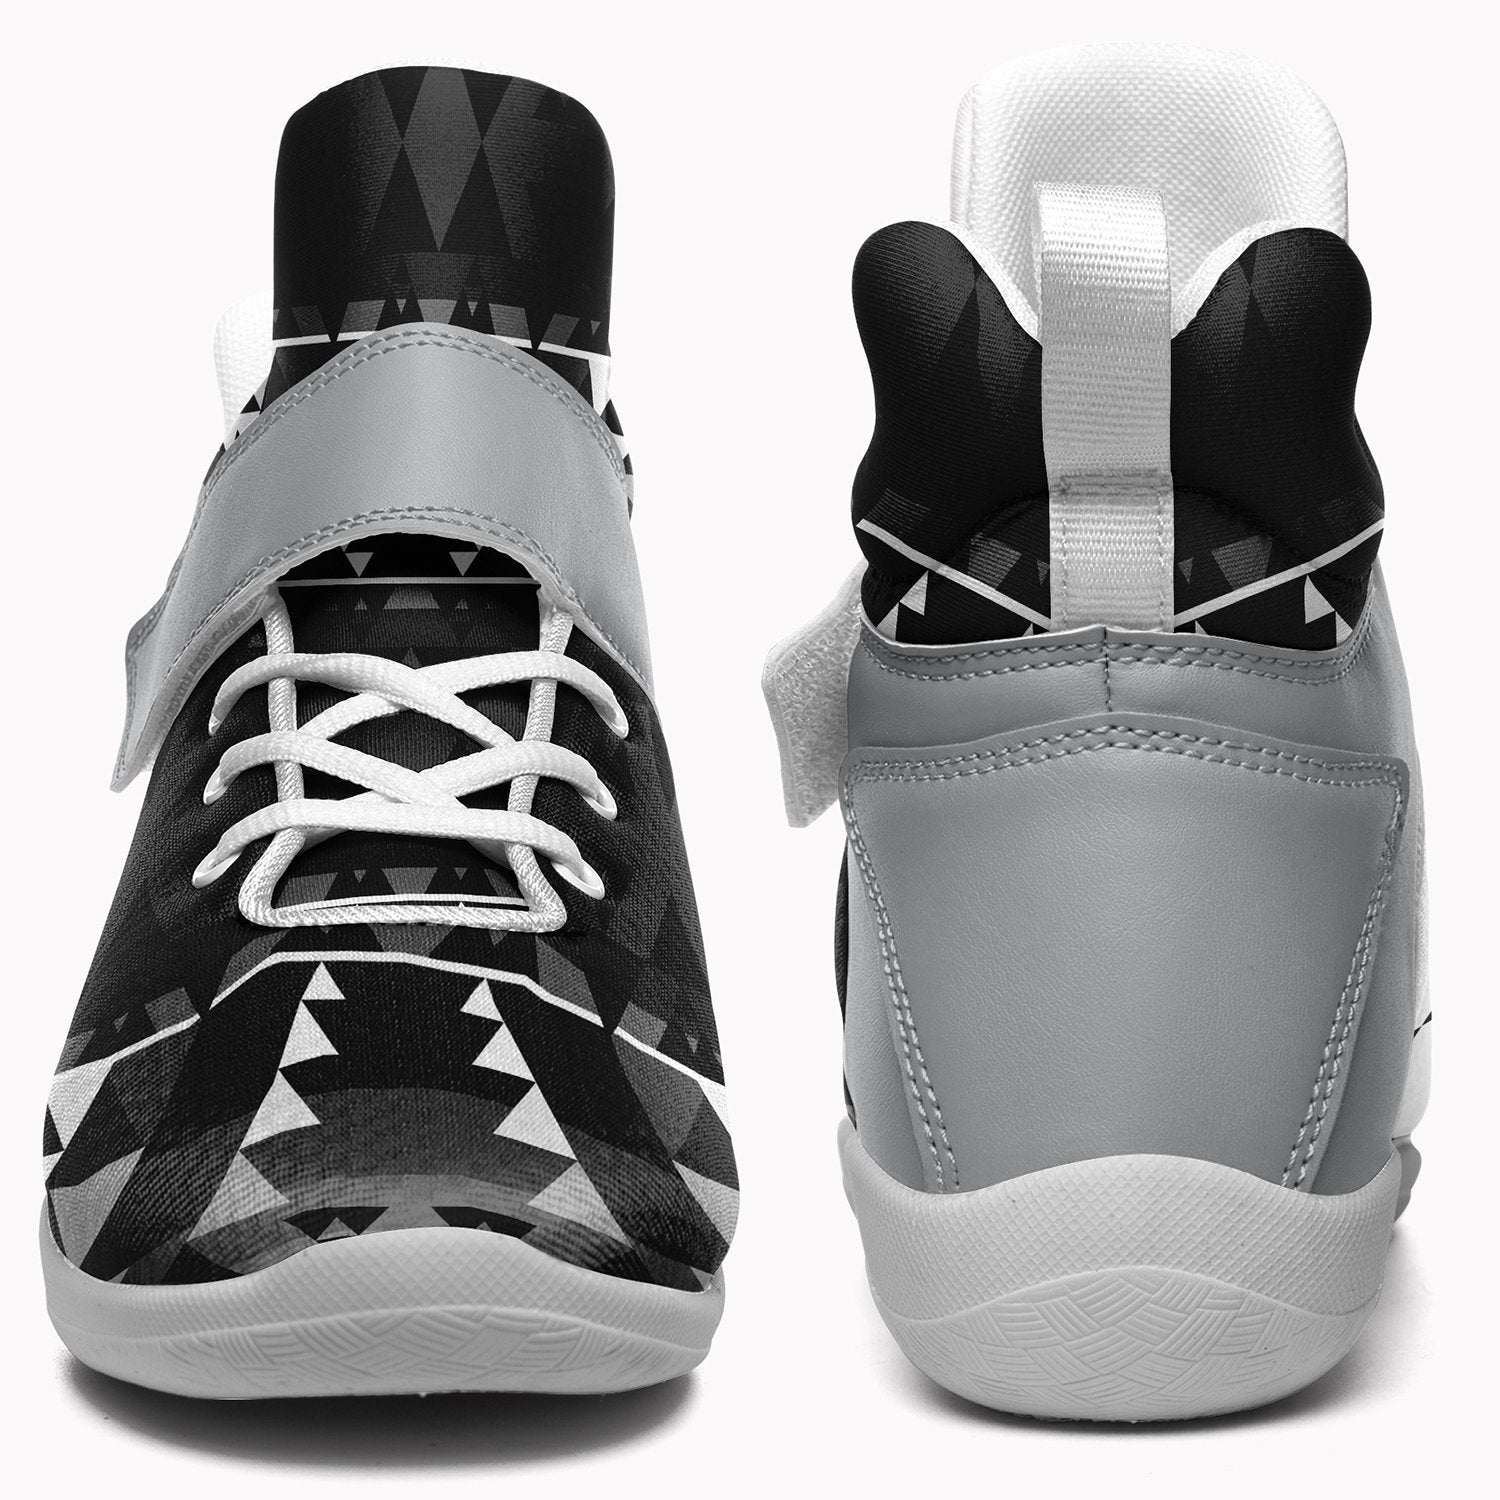 Writing on Stone Black and White Ipottaa Basketball / Sport High Top Shoes - White Sole 49 Dzine 